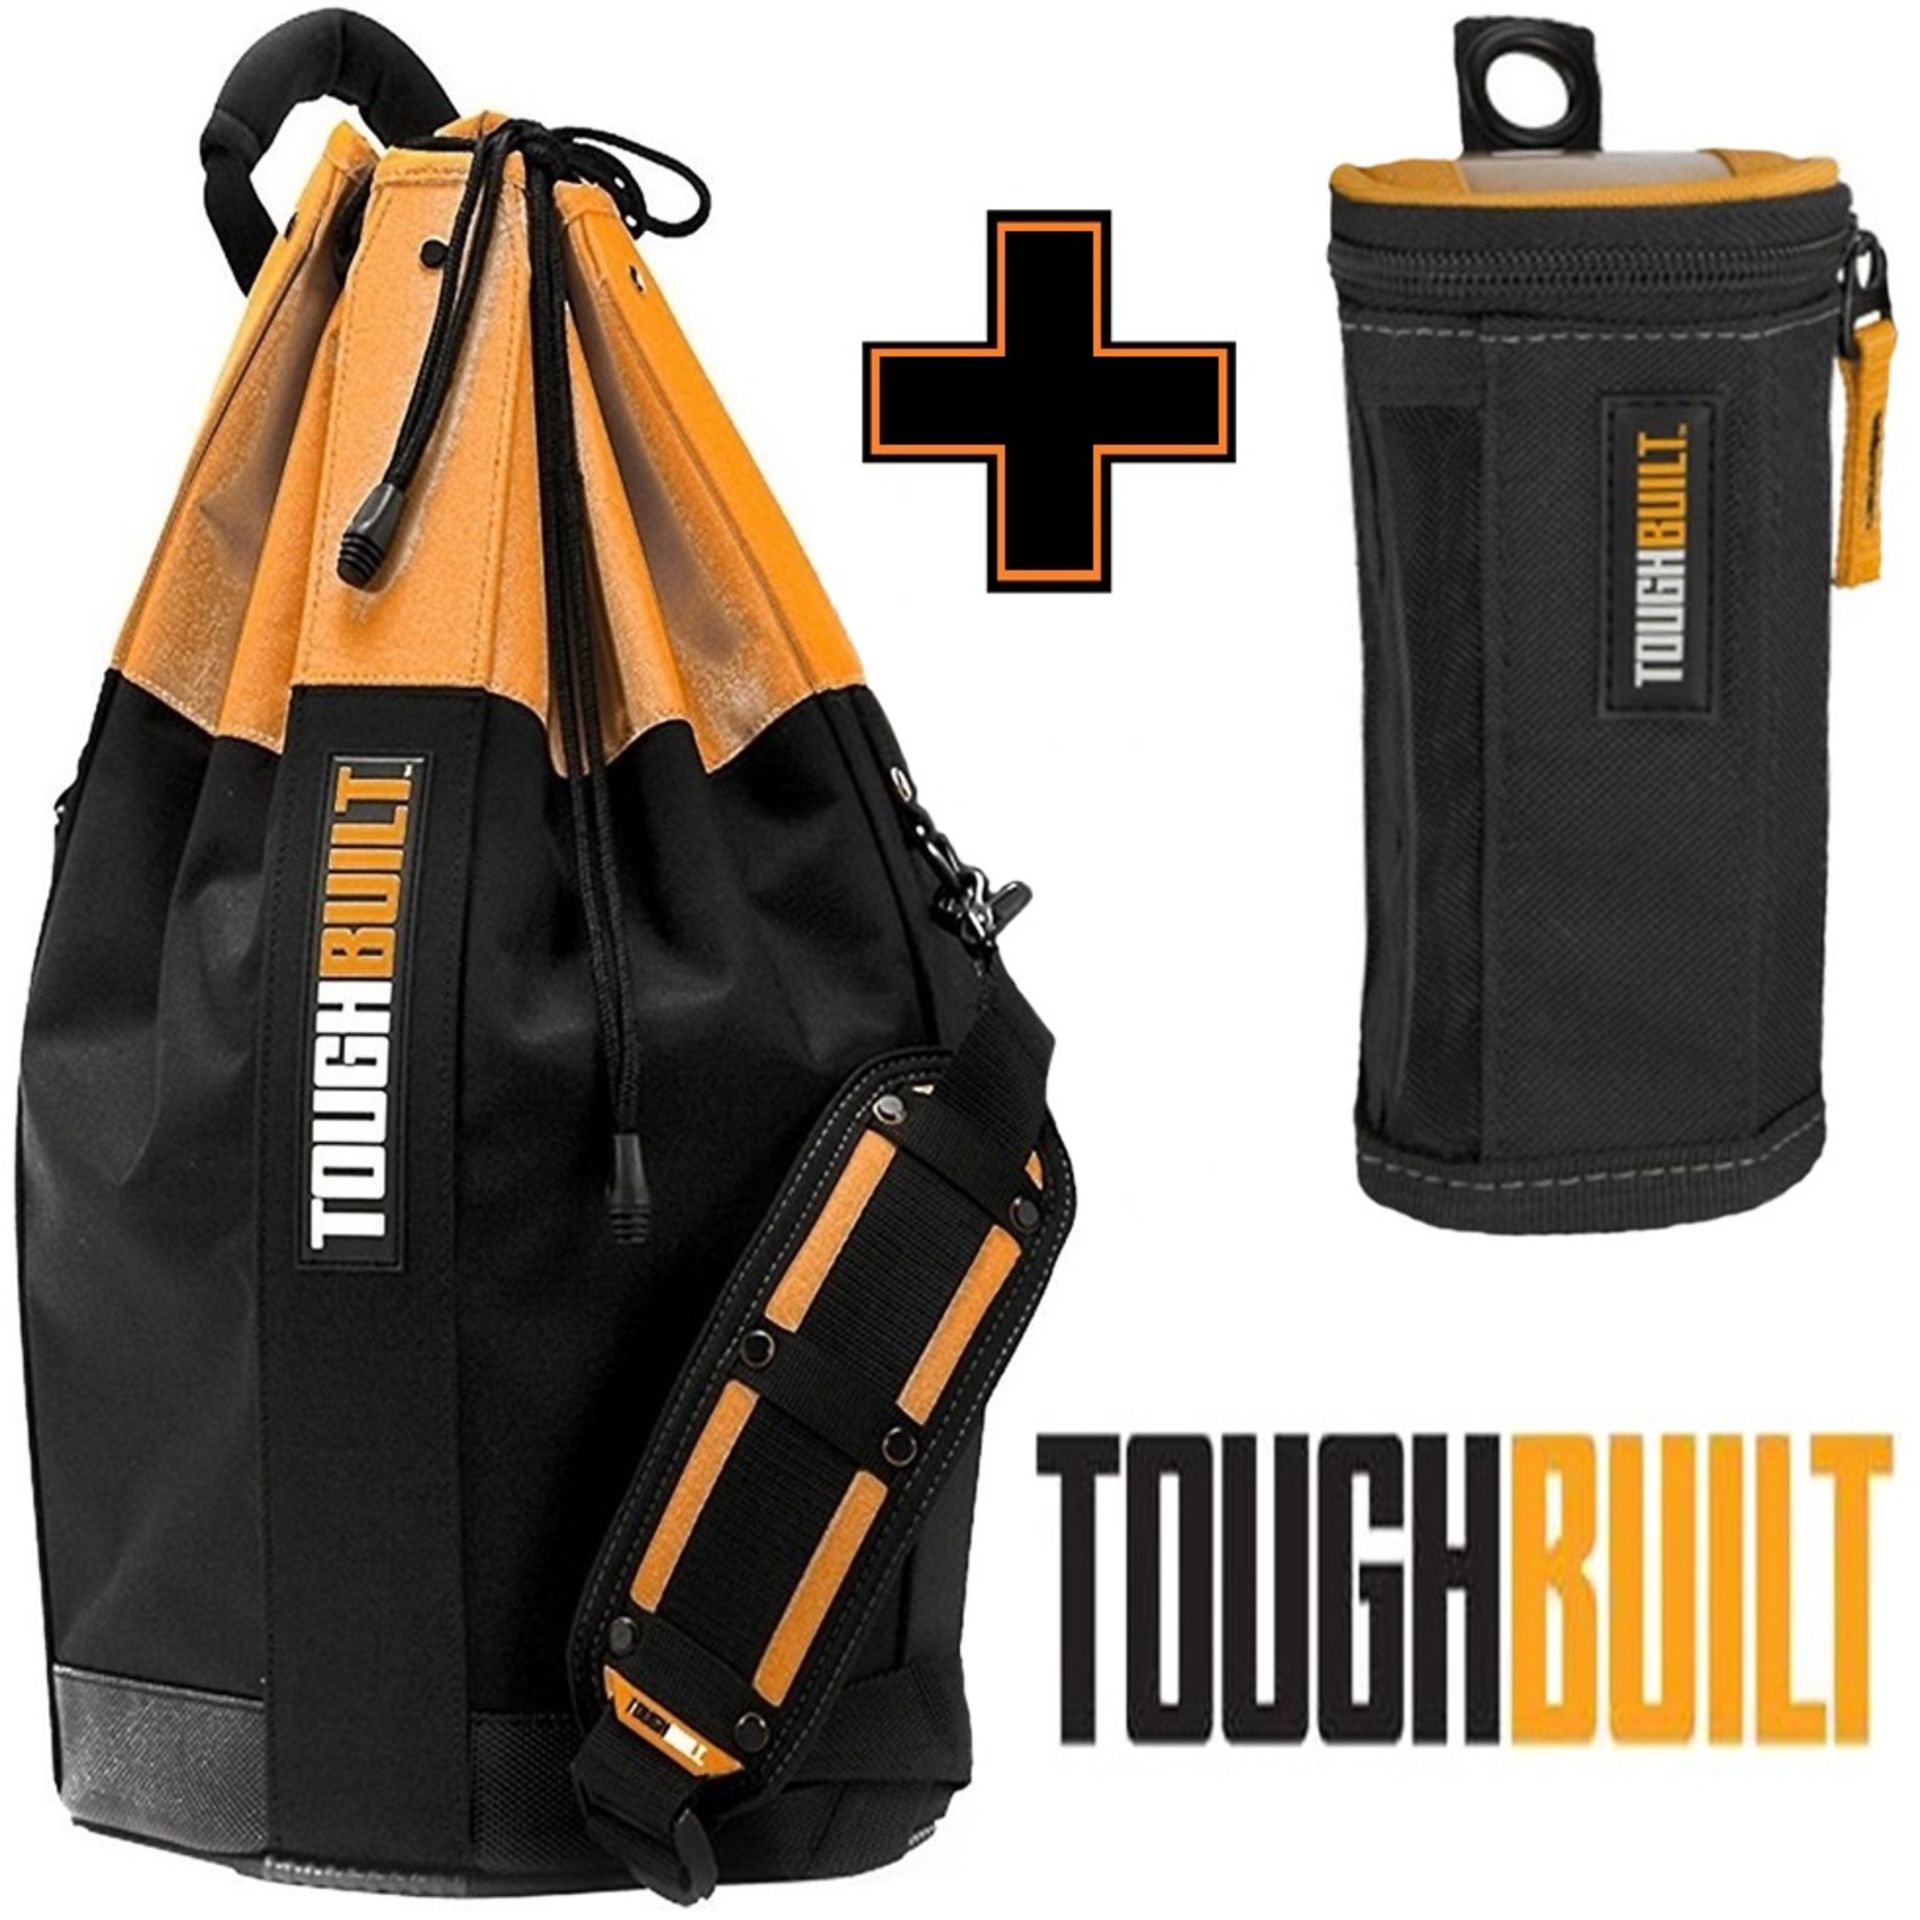 TOUGHBUILT TOOLCARRIER DUFFLE BAG With free screw bags for site movement and tool carry Heavy duty